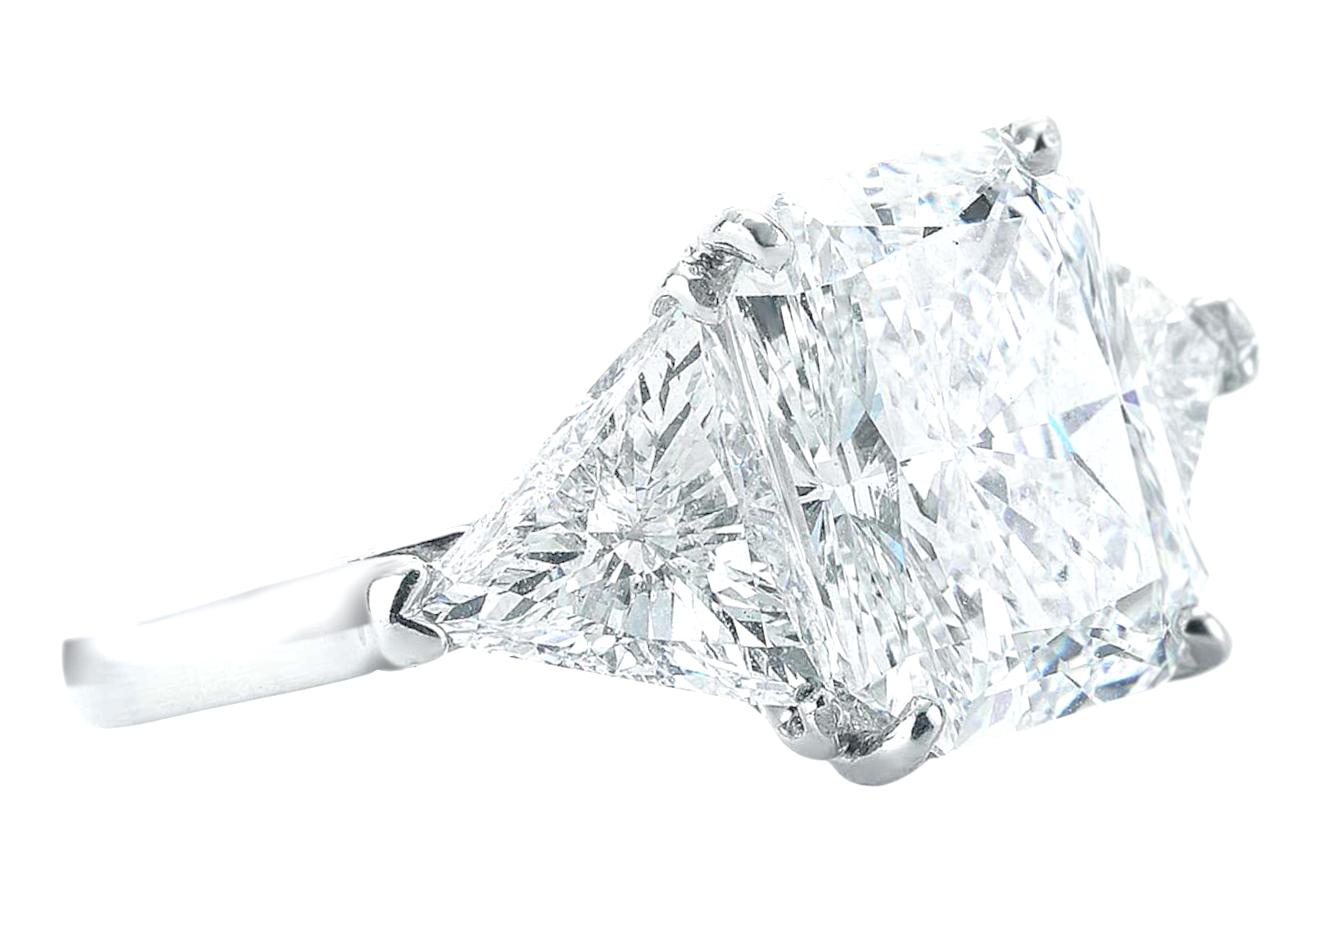 Exquisite three stone diamond ring composed by a GIA certified 4.02 Carat Radiant Cut diamond and two side trillion cut diamonds with excellent proportions.
Each trillion cut diamond weights approxilmately 1 carat.

You will receive the GIA